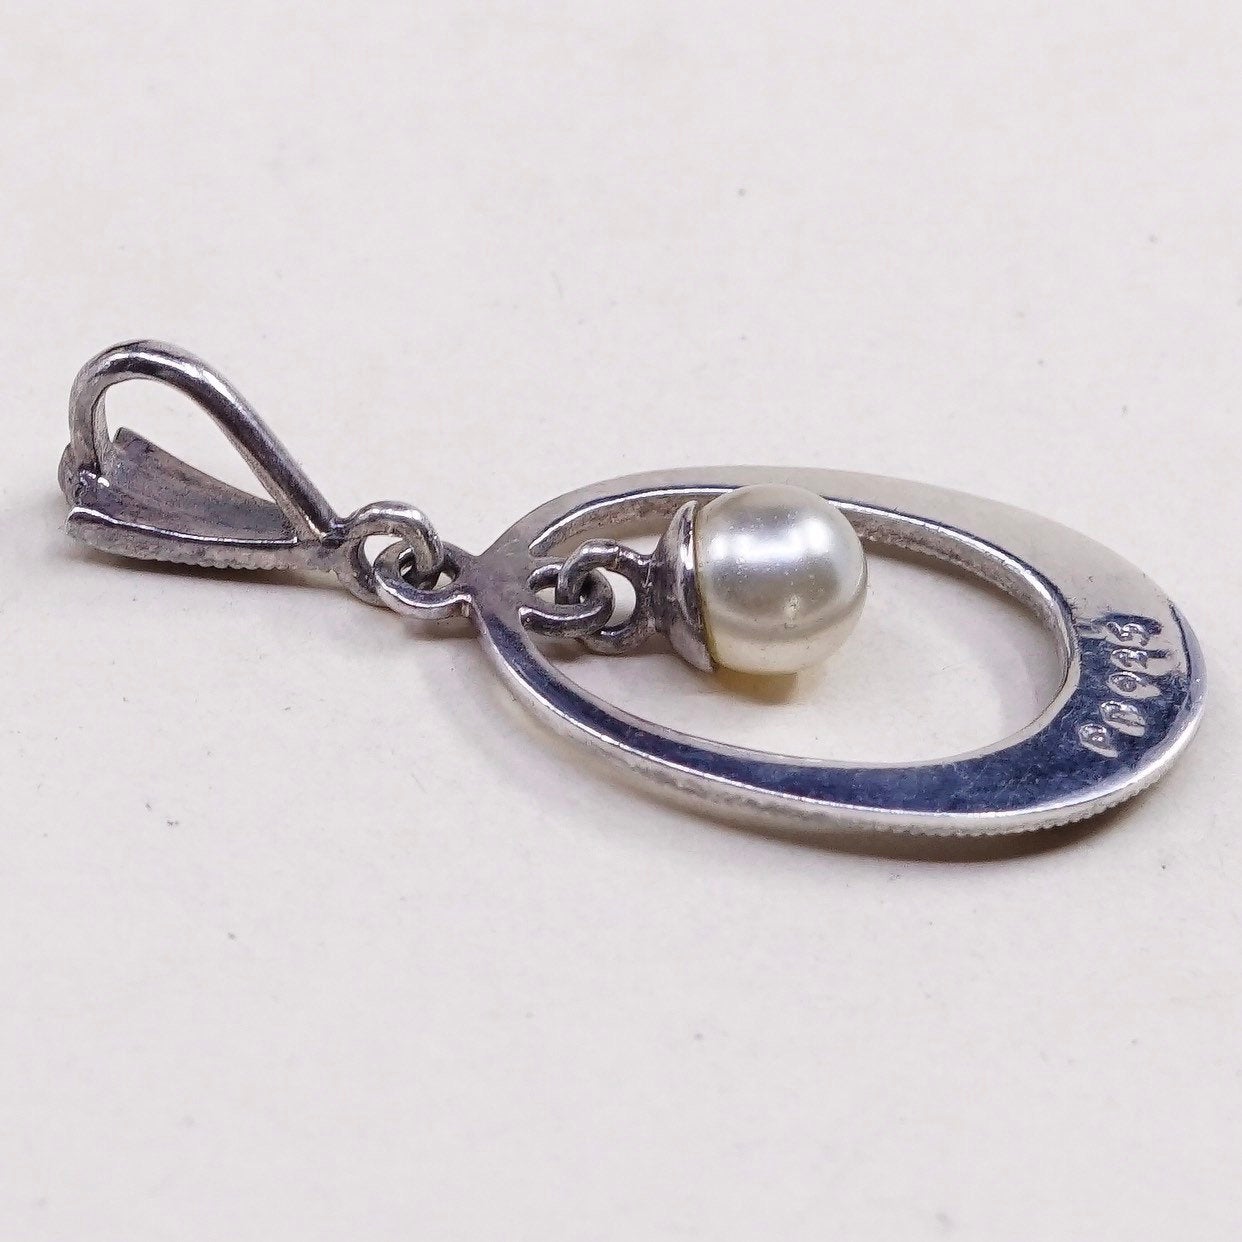 VTG Sterling silver Pendant, solid 925 silver with pearl and marcasite